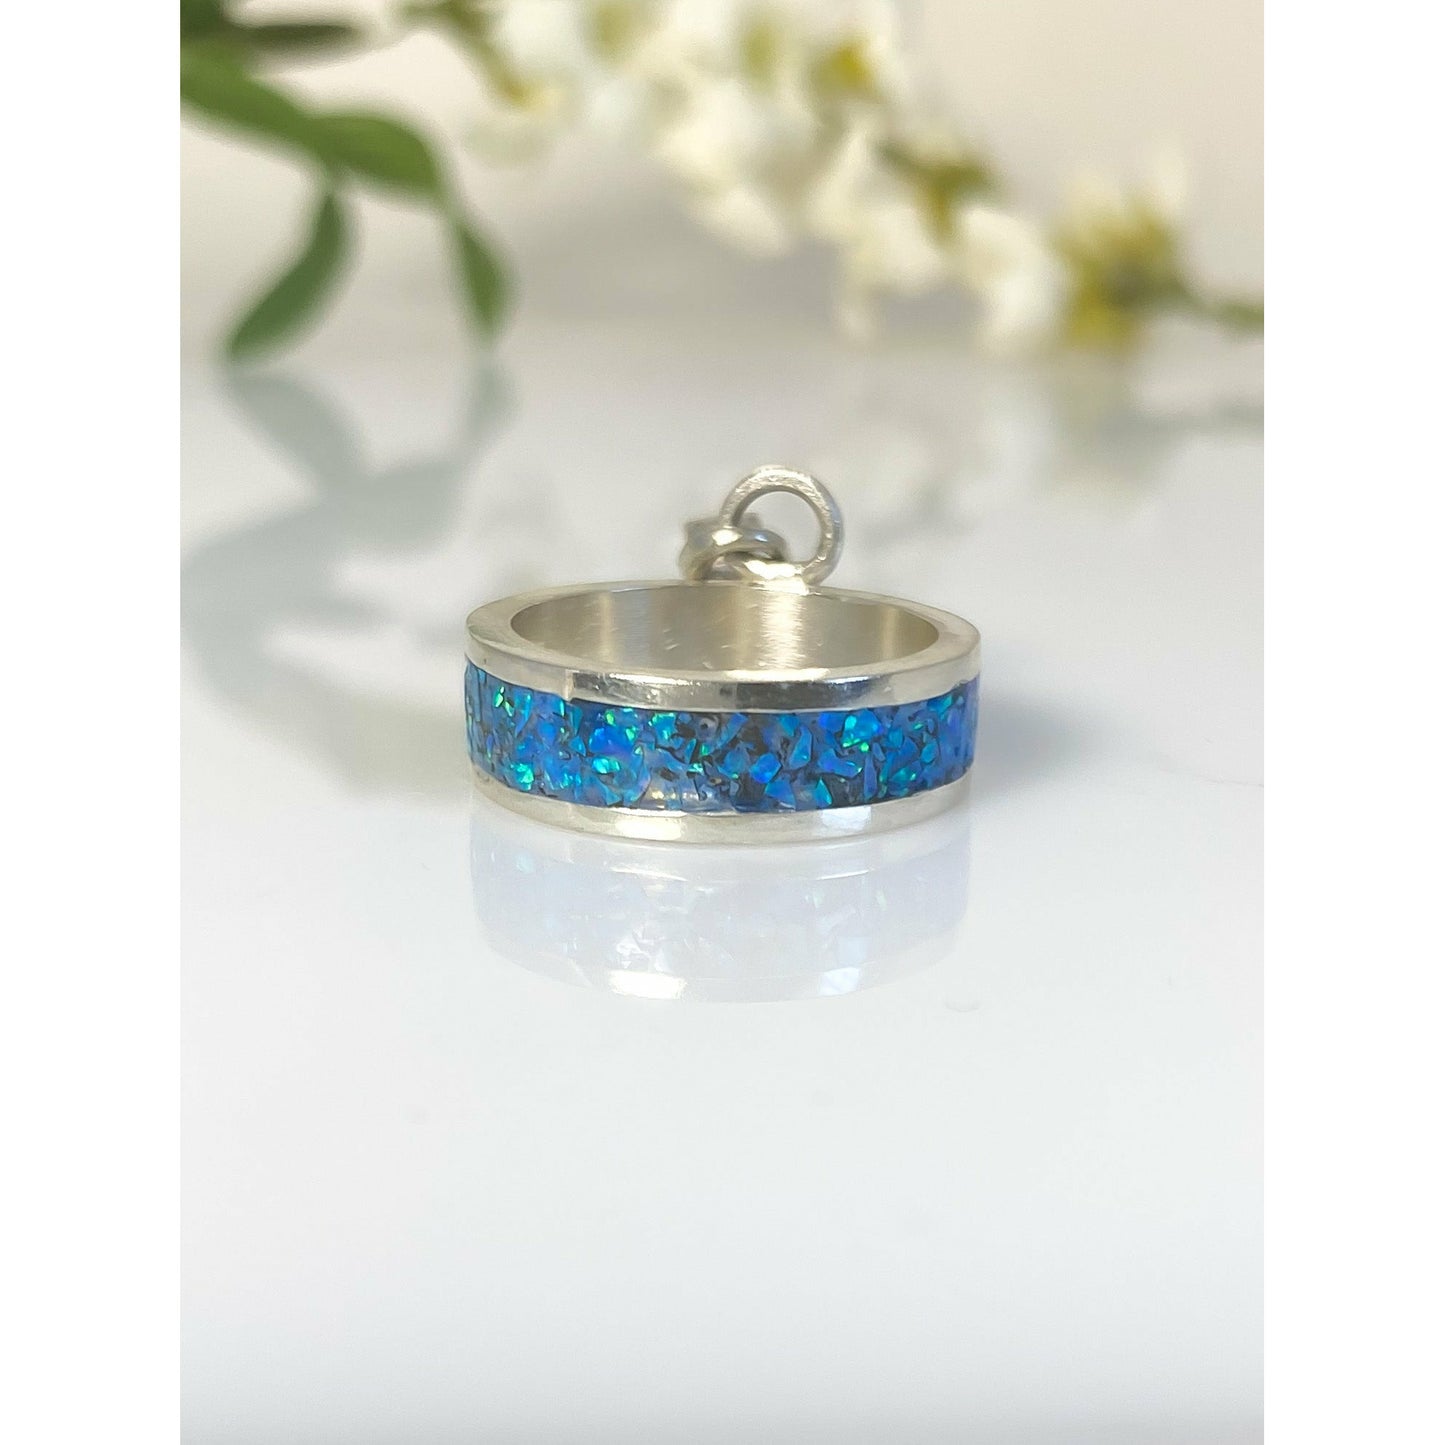 Australian Blue Opal Sterling Silver Inlay Ring with Sterling Silver Heart Charm